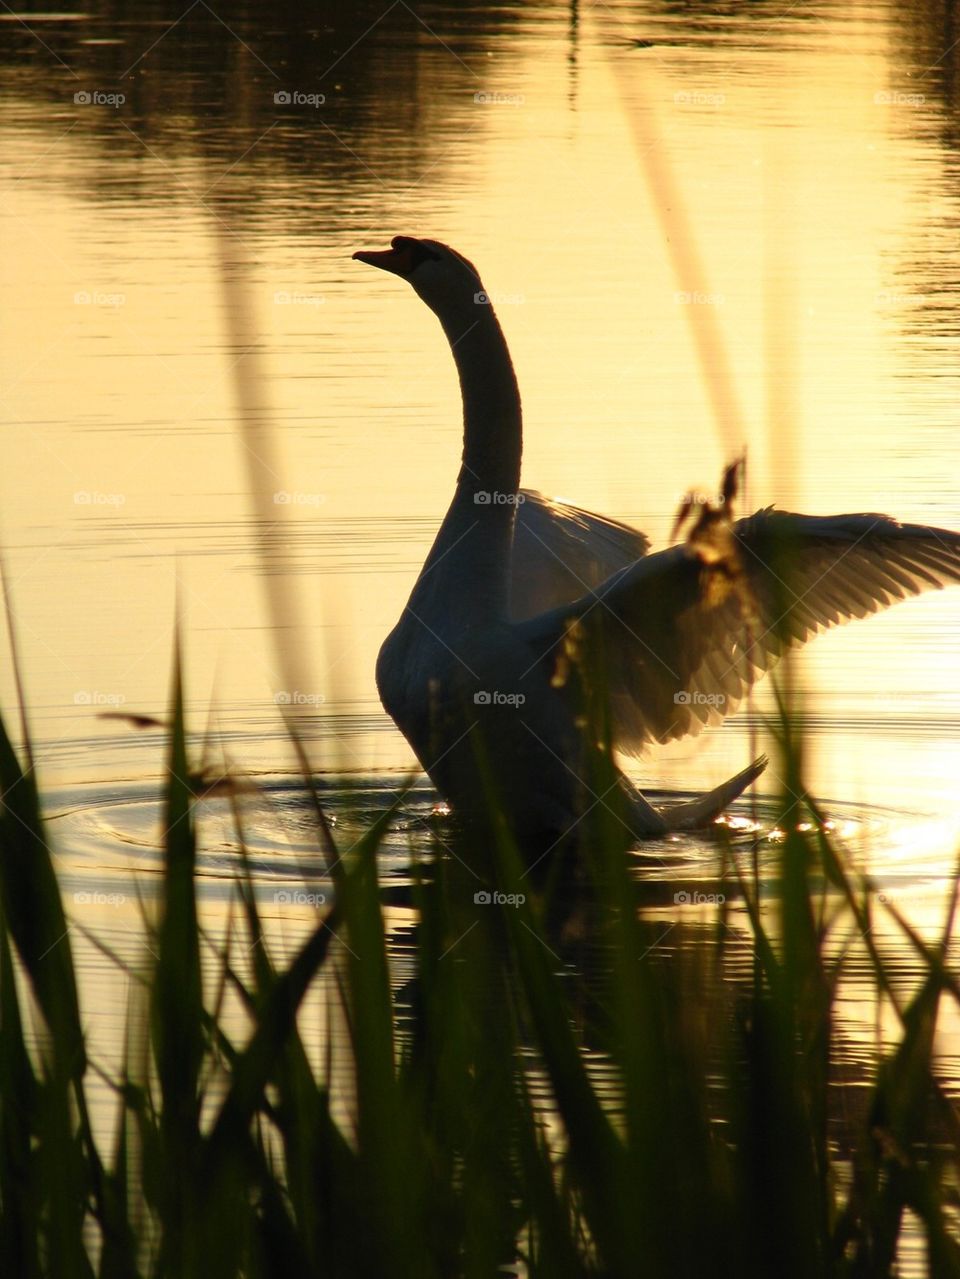 #sunset,Wings shine for a swan, light from sunset in wings, sunset on a lake, calmness, pacification